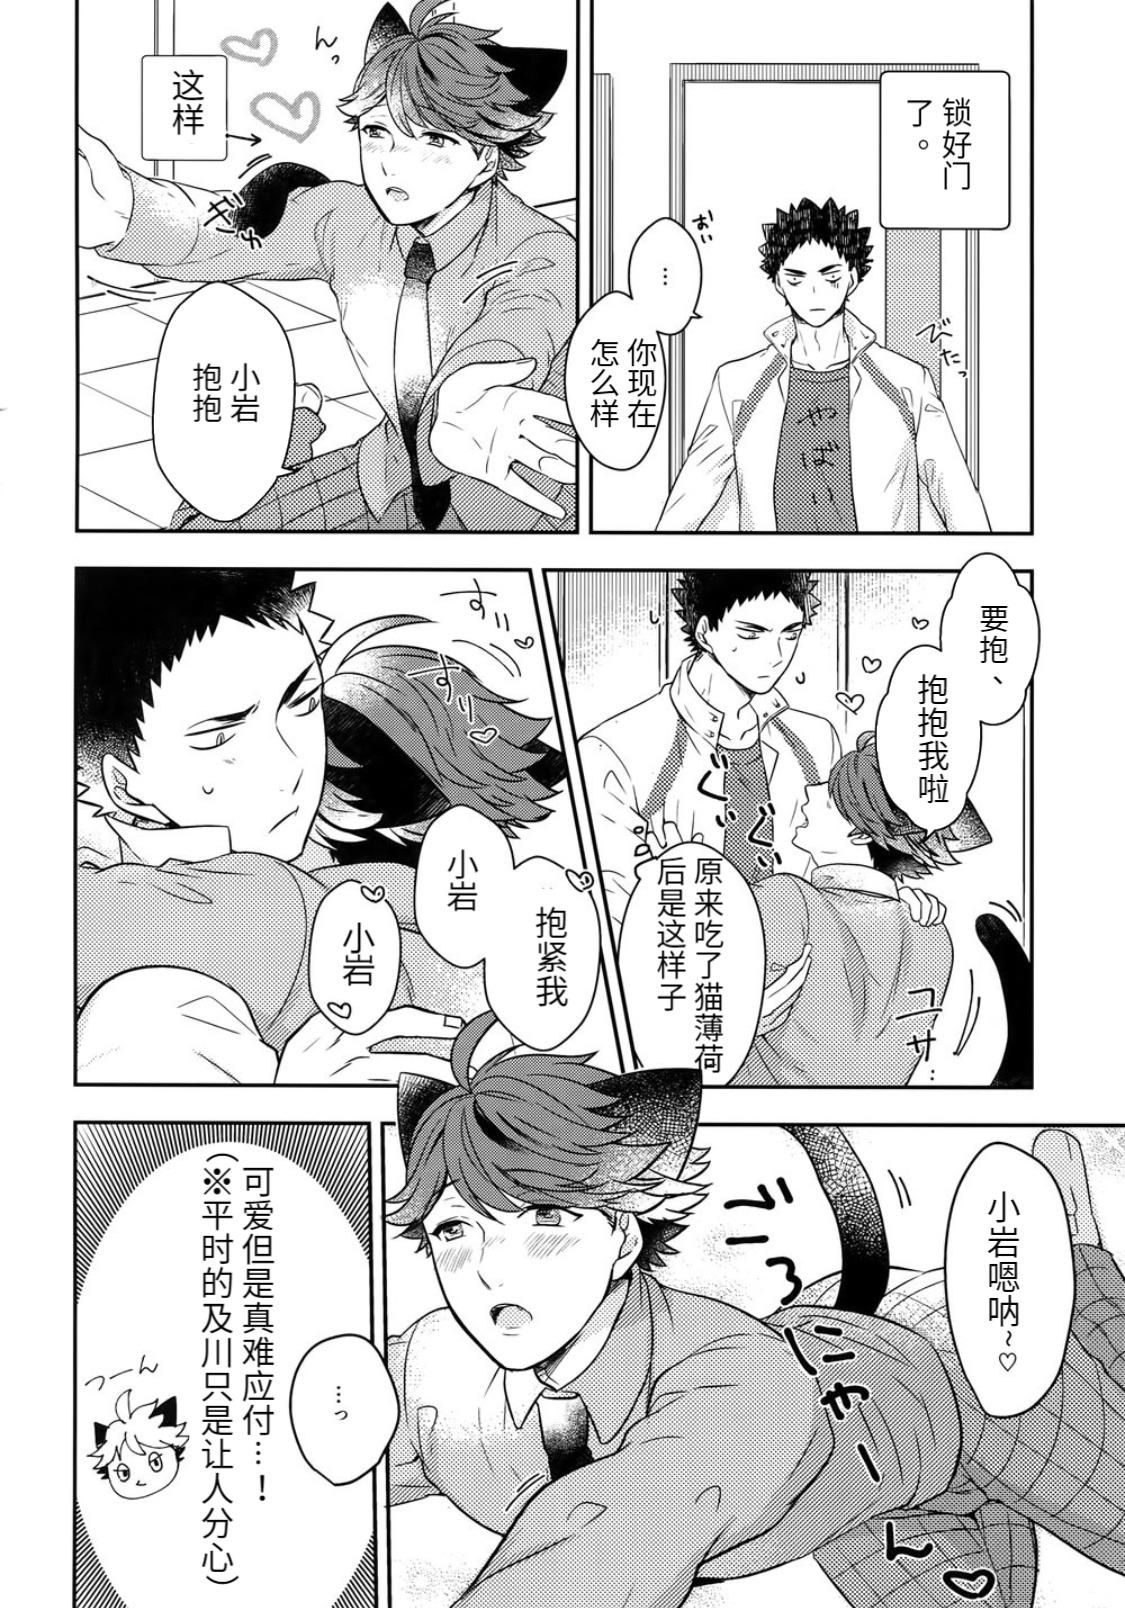 Cum In Mouth 我想成为小岩的猫4 I want to become Iwa-chan's Cat! 4 - Haikyuu Bondagesex - Page 6